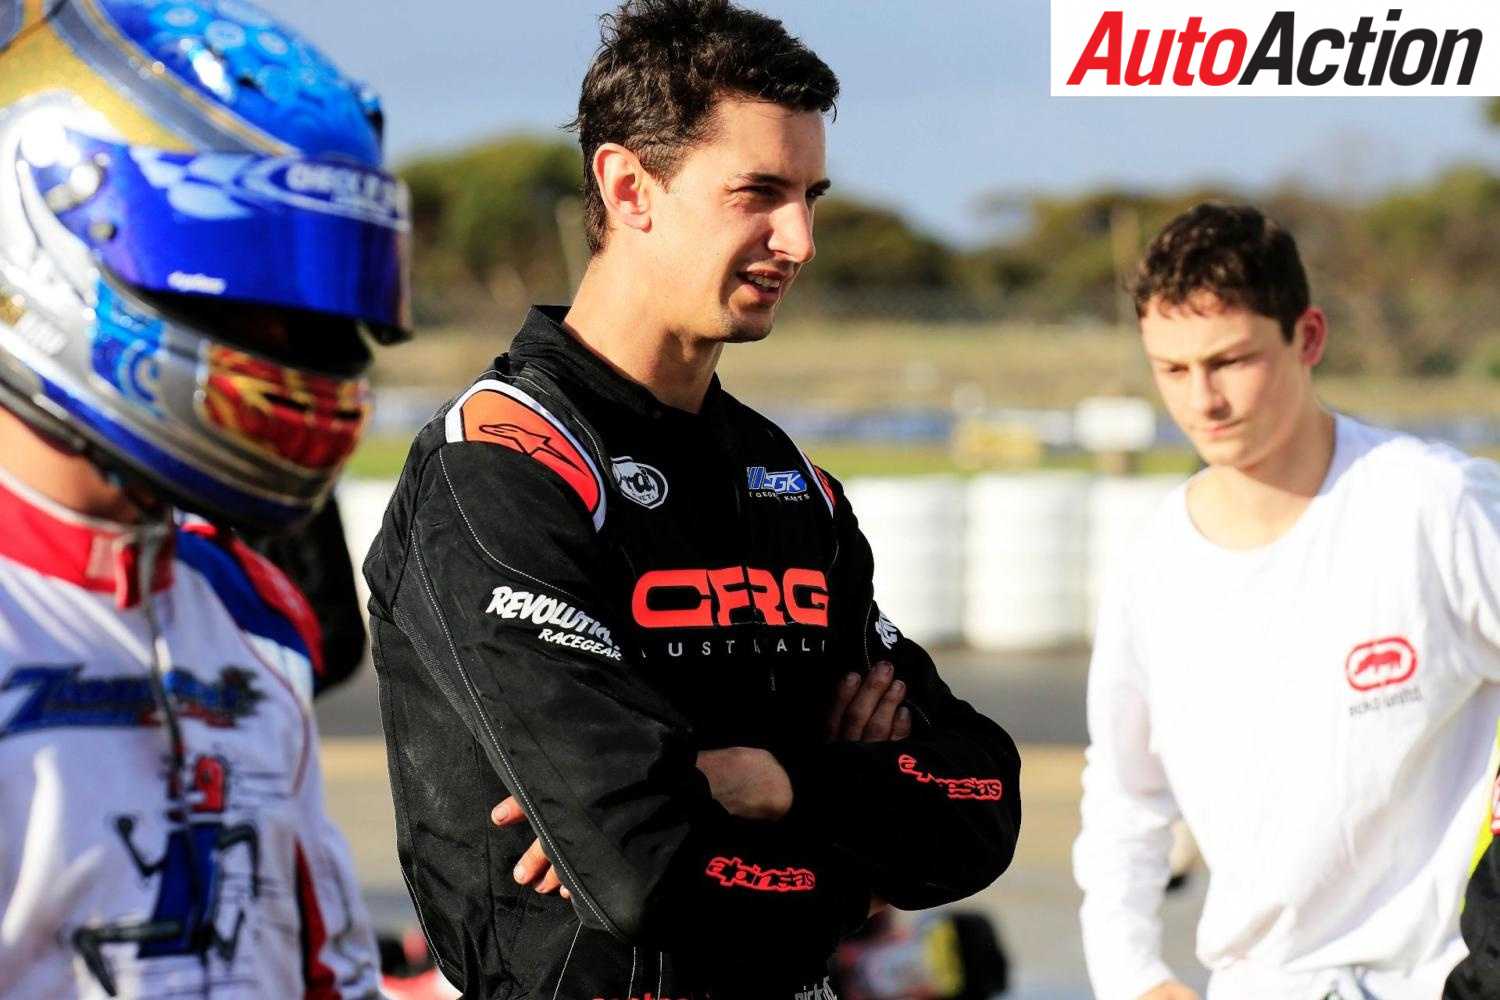 Nick Percat will compete in the Race of Stars karting event - Photo: Coopers Photography